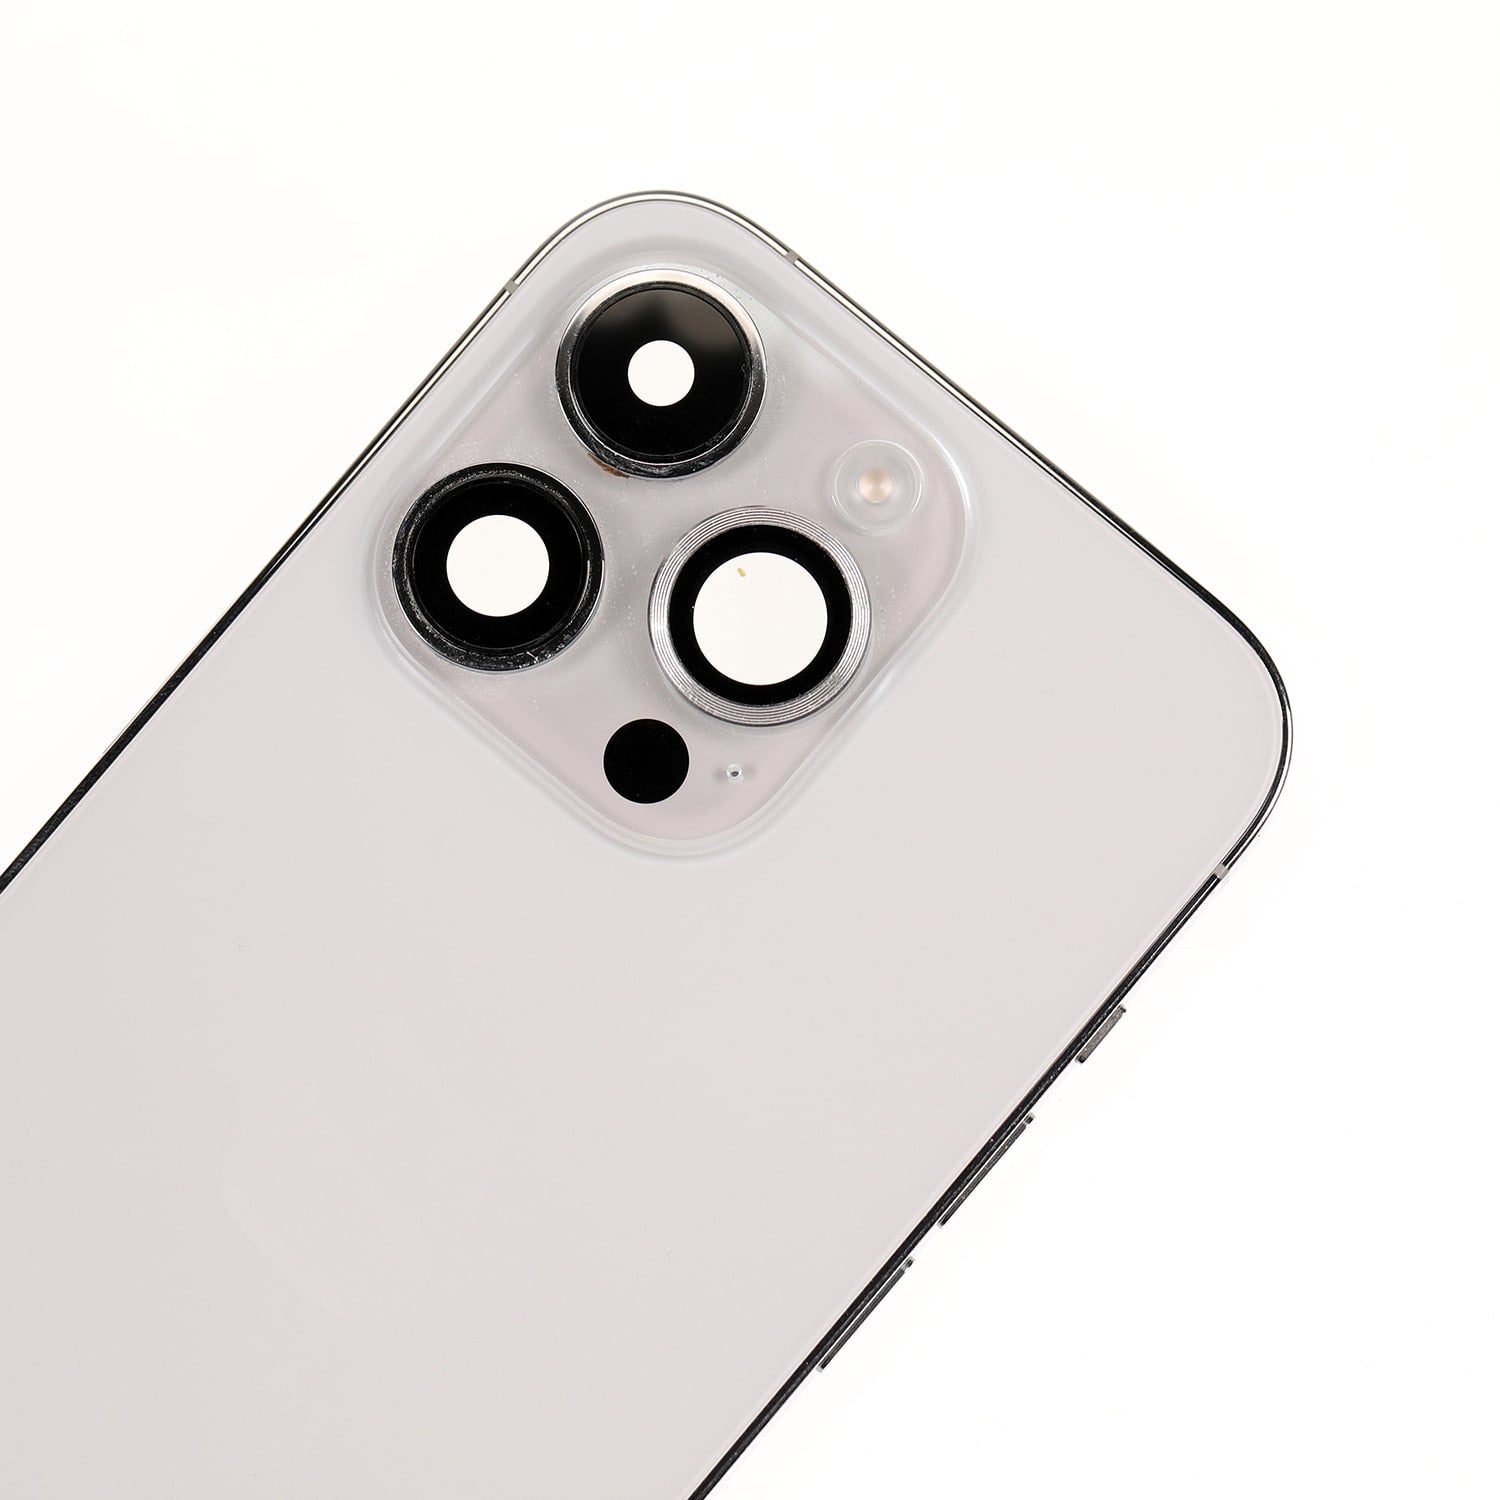 Replacement for iPhone 14 Pro Max Back Cover Full Assembly - Silver